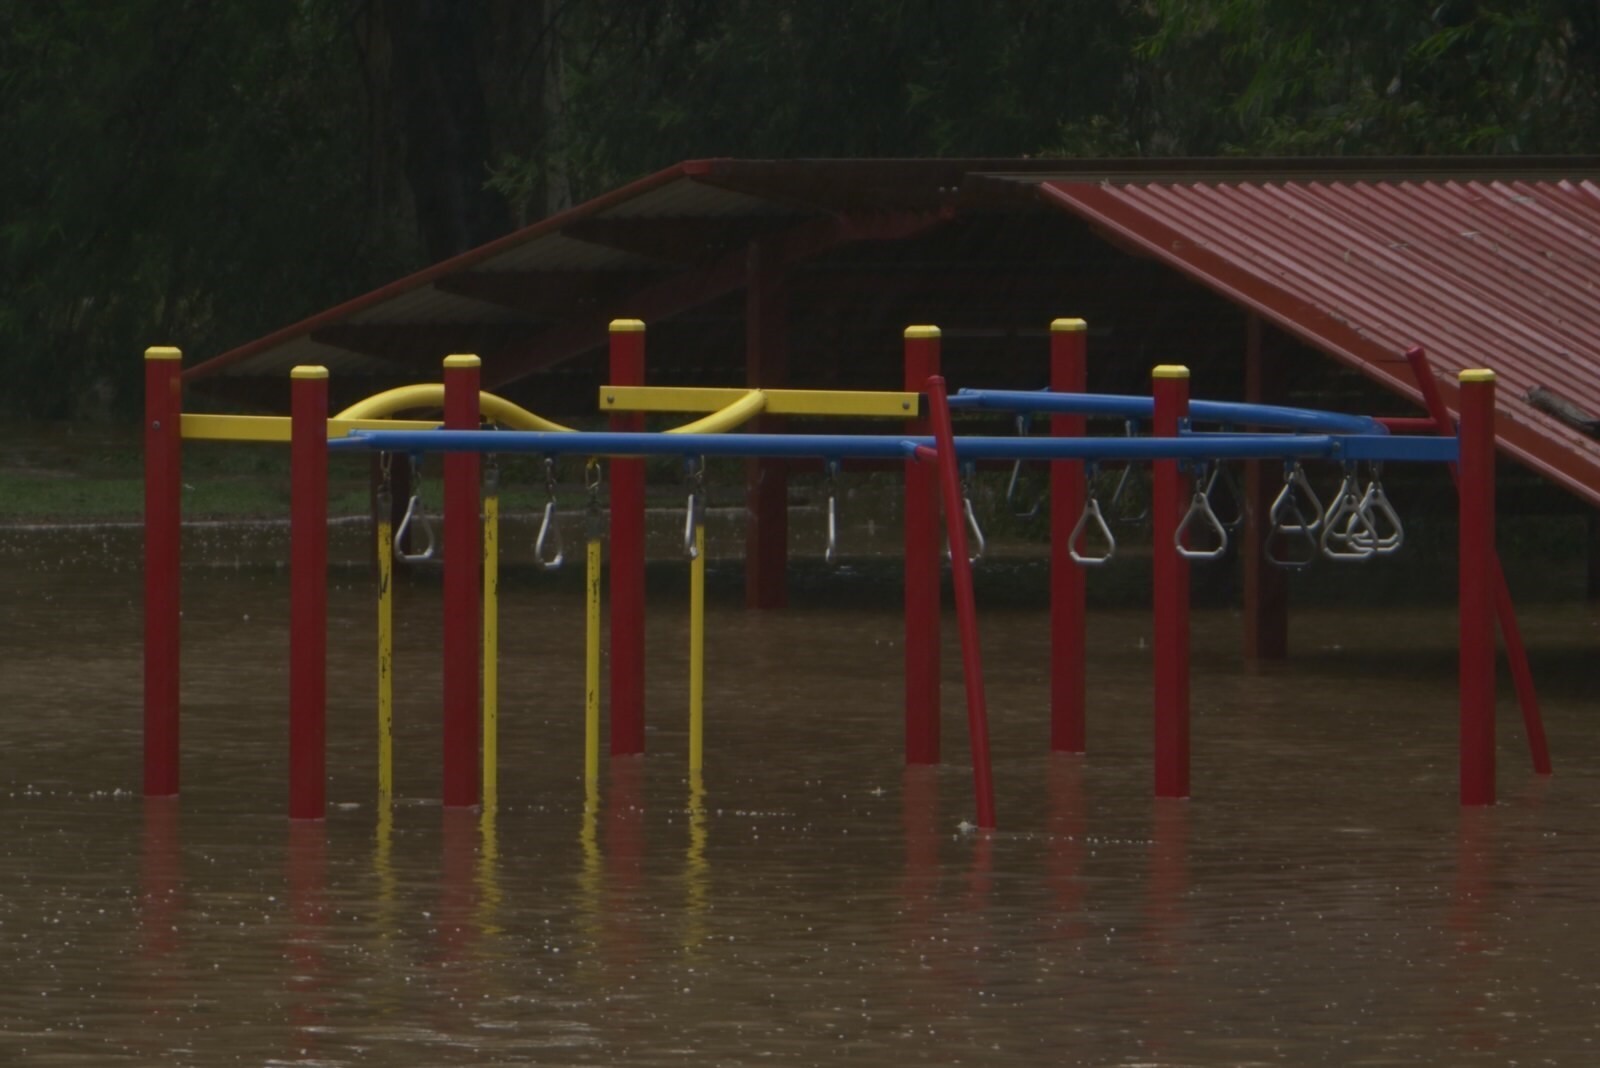 Picture shows water rising around monkeybars.